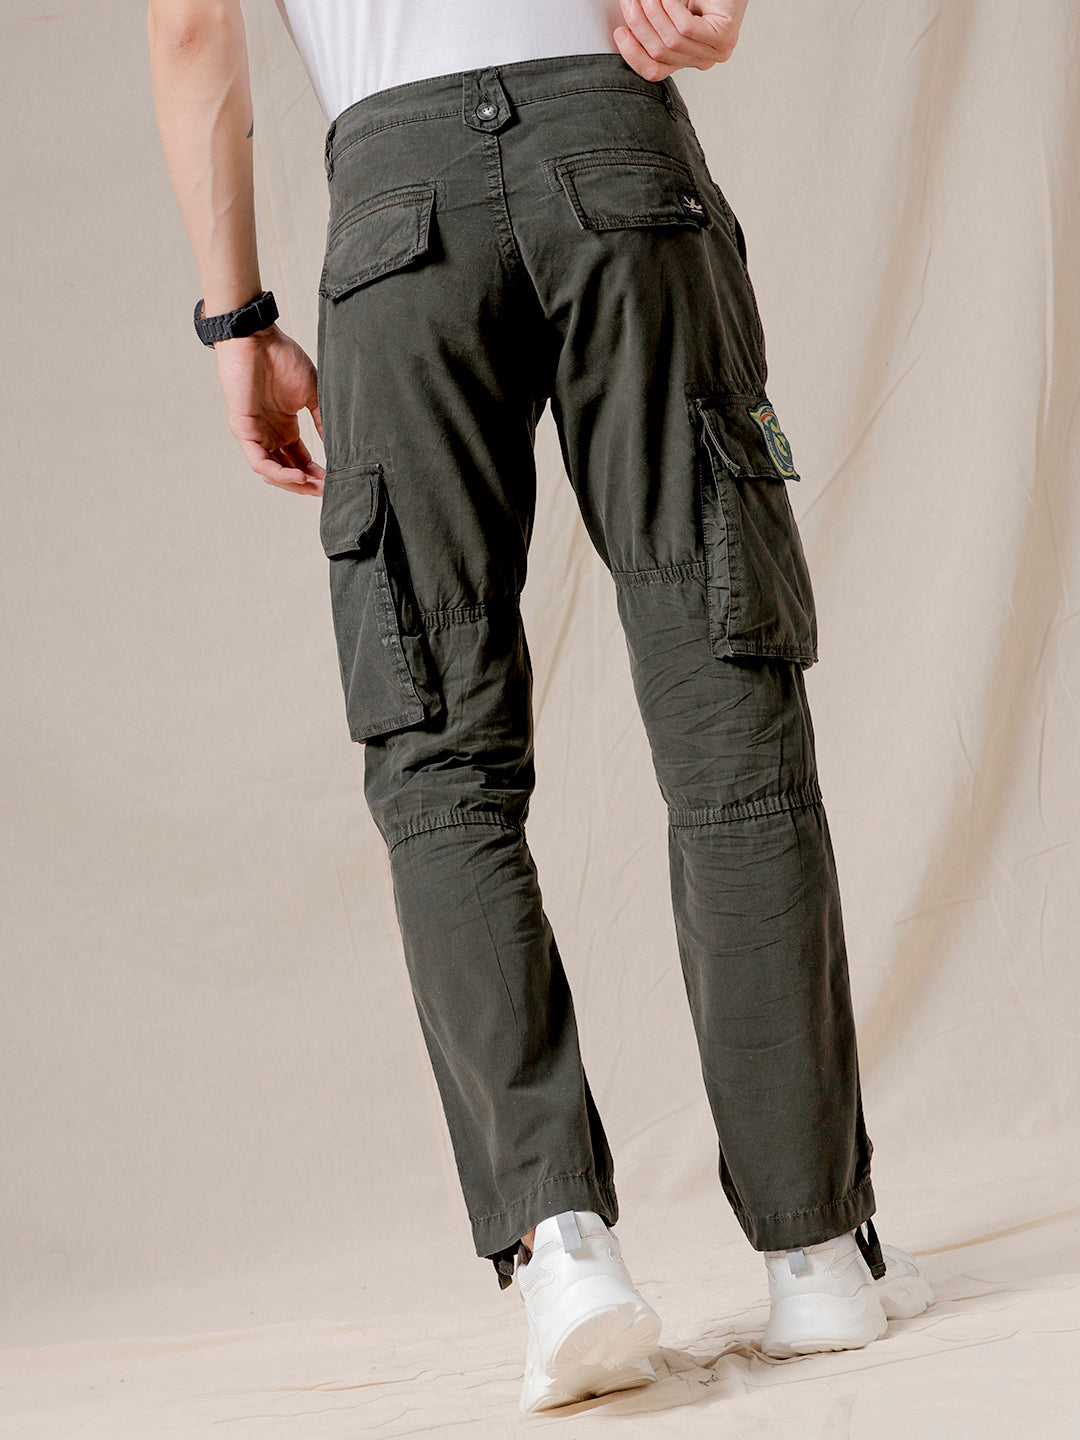 Relaxed Fit Nylon cargo trousers - Light sage green - Men | H&M